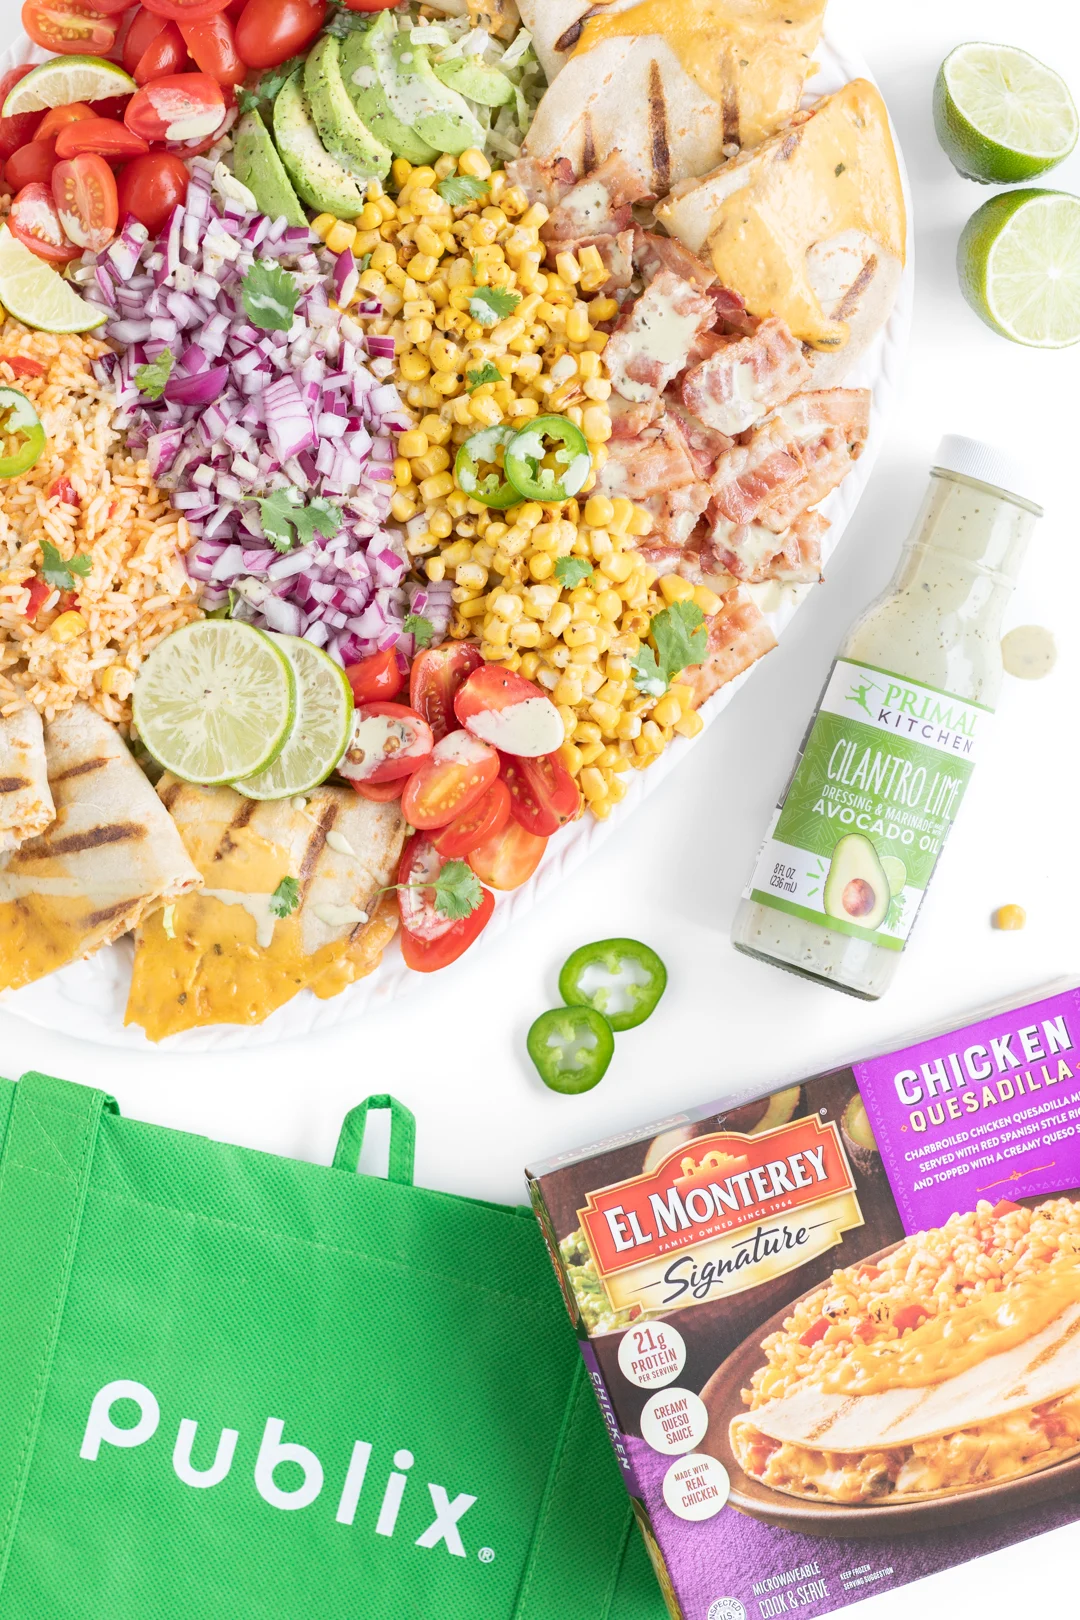 Over the top photo of large family salad, reusable publix shopping bag, el monterey quesadilla meal and primal kitchen lime and cilantro dressing